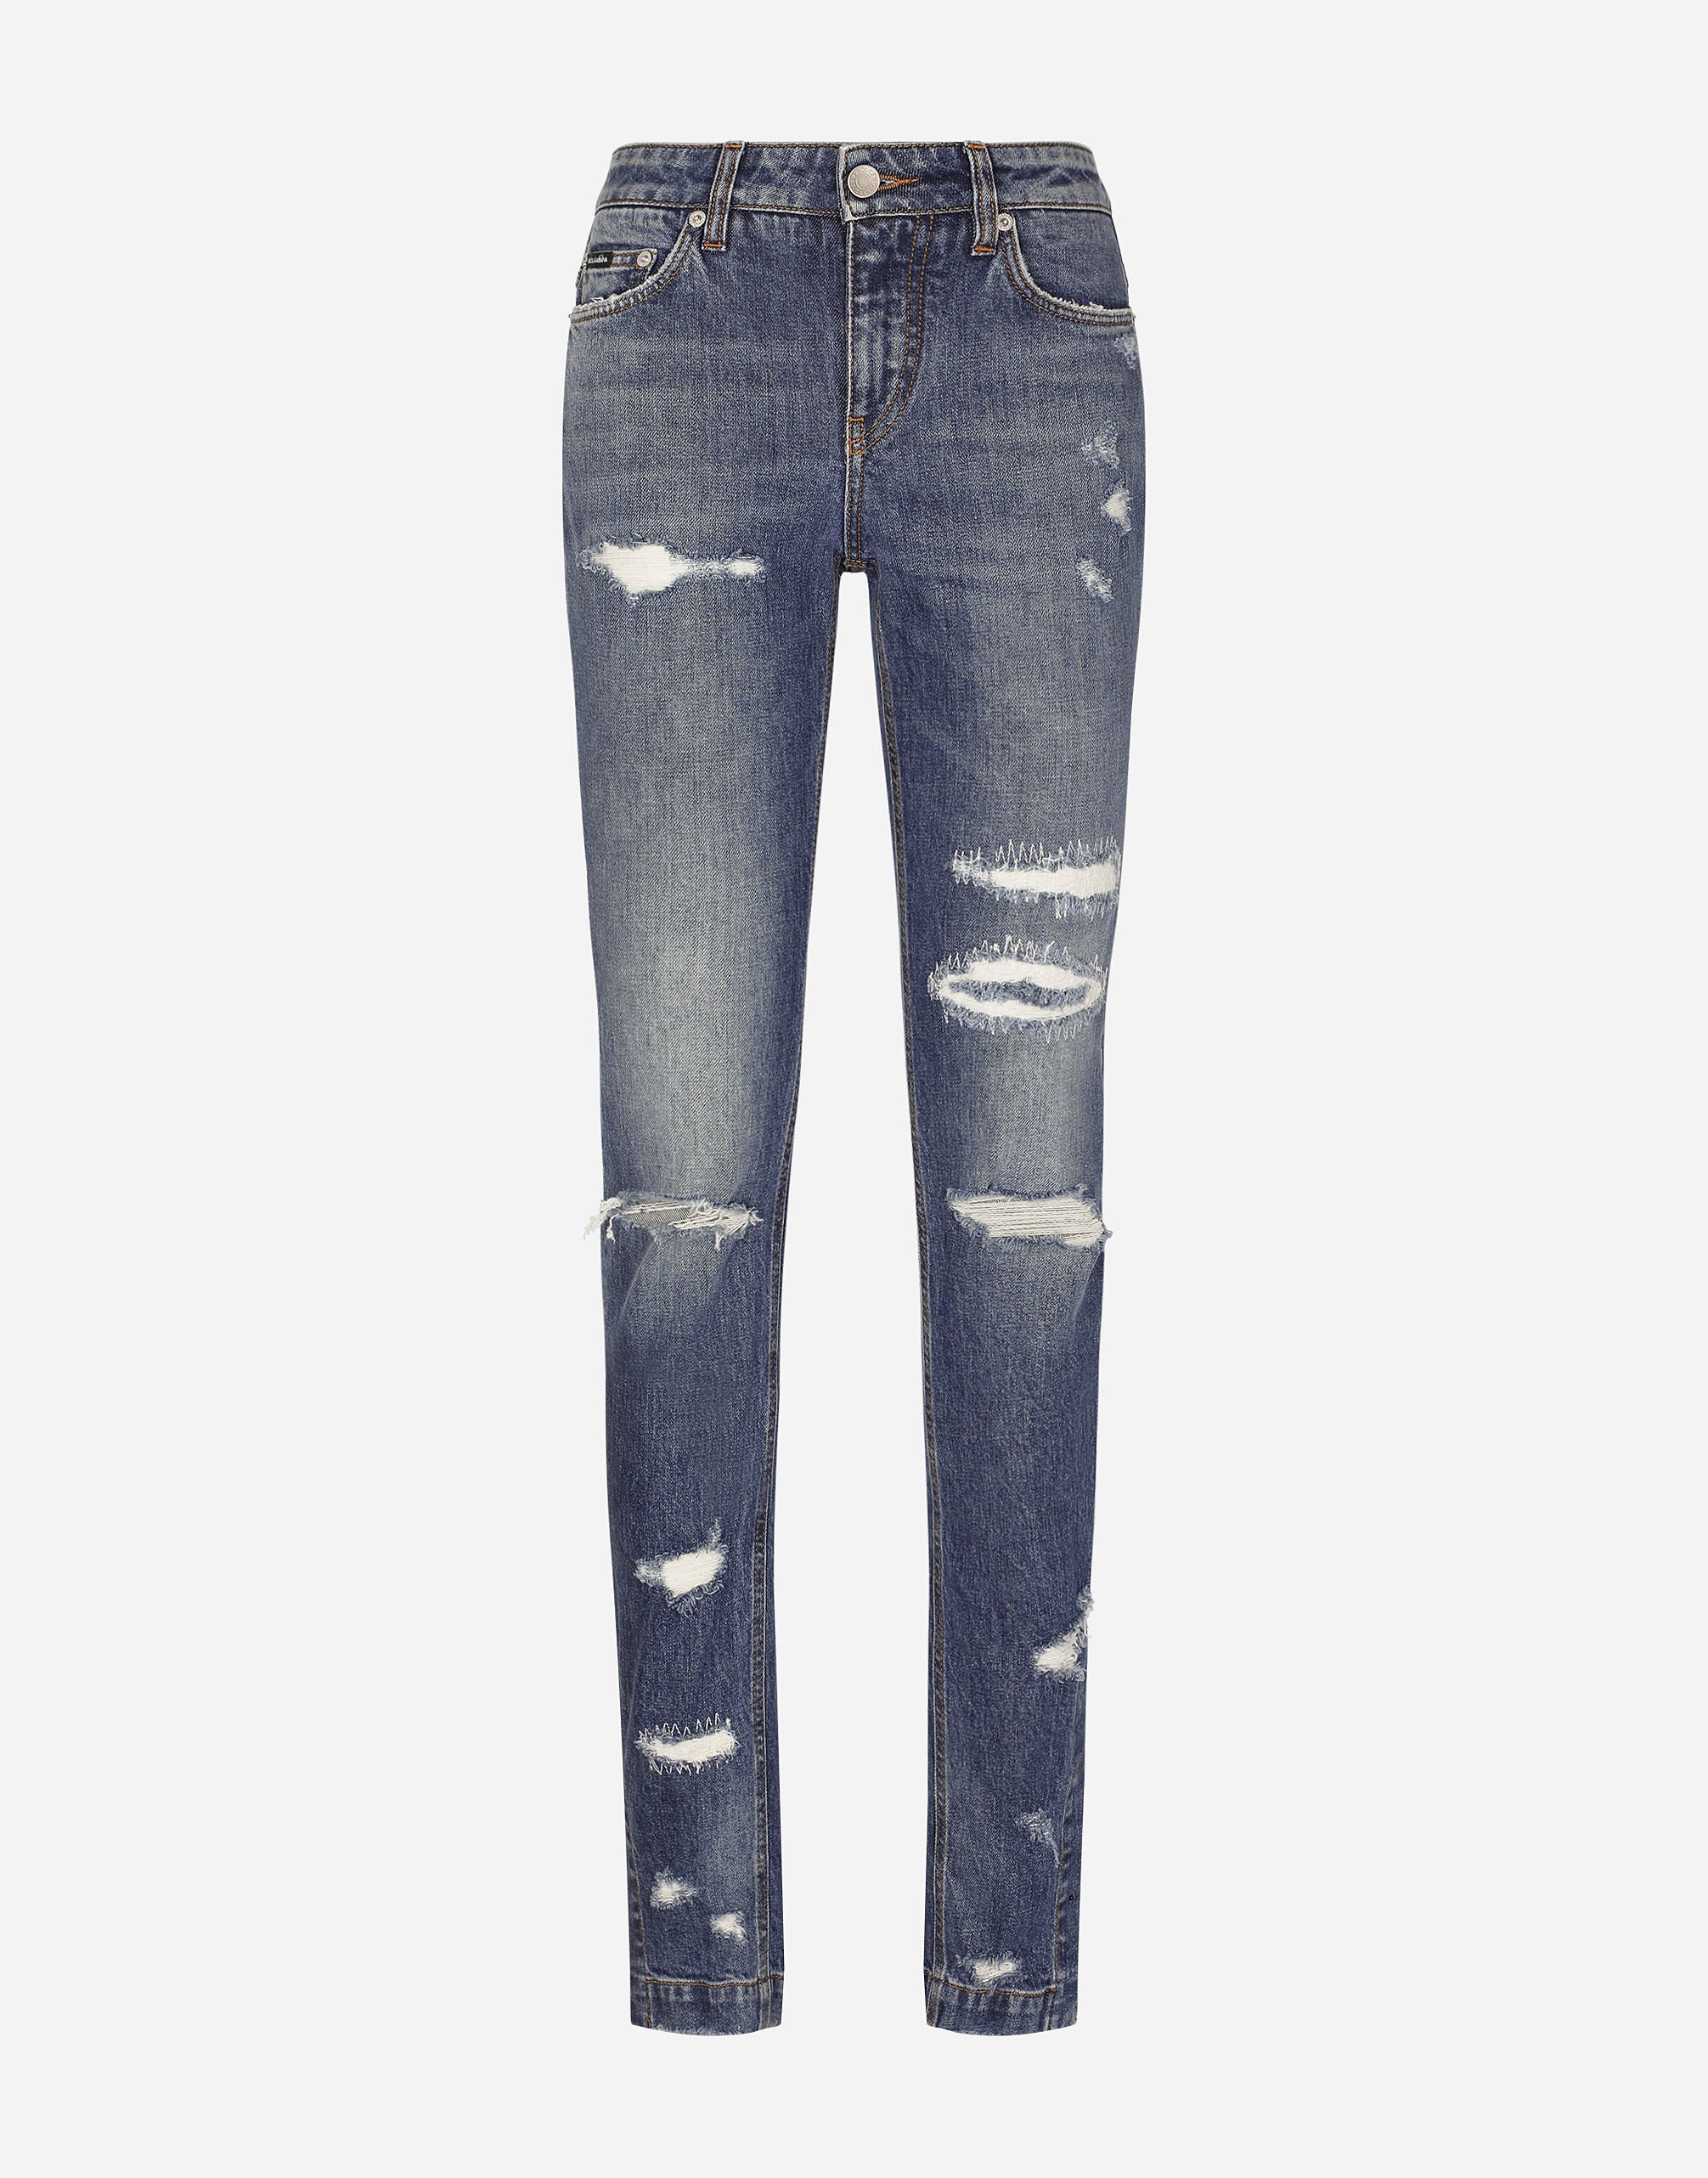 Dolce & Gabbana Girly jeans with ripped details Black F0D1CTFUBFX